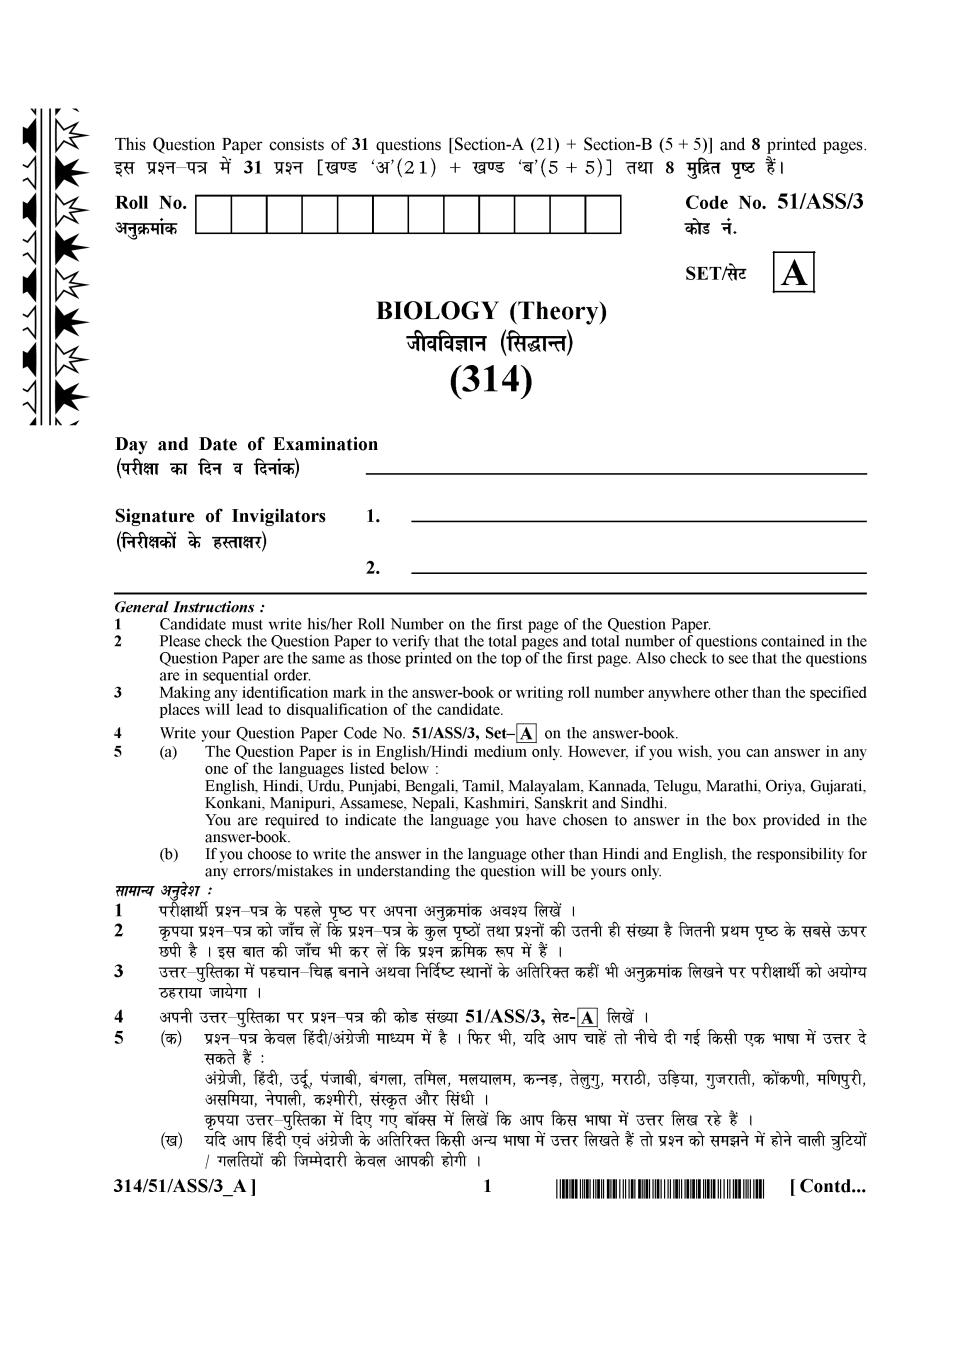 NIOS Class 12 Question Paper Oct 2015 - Biology Theory - Page 1